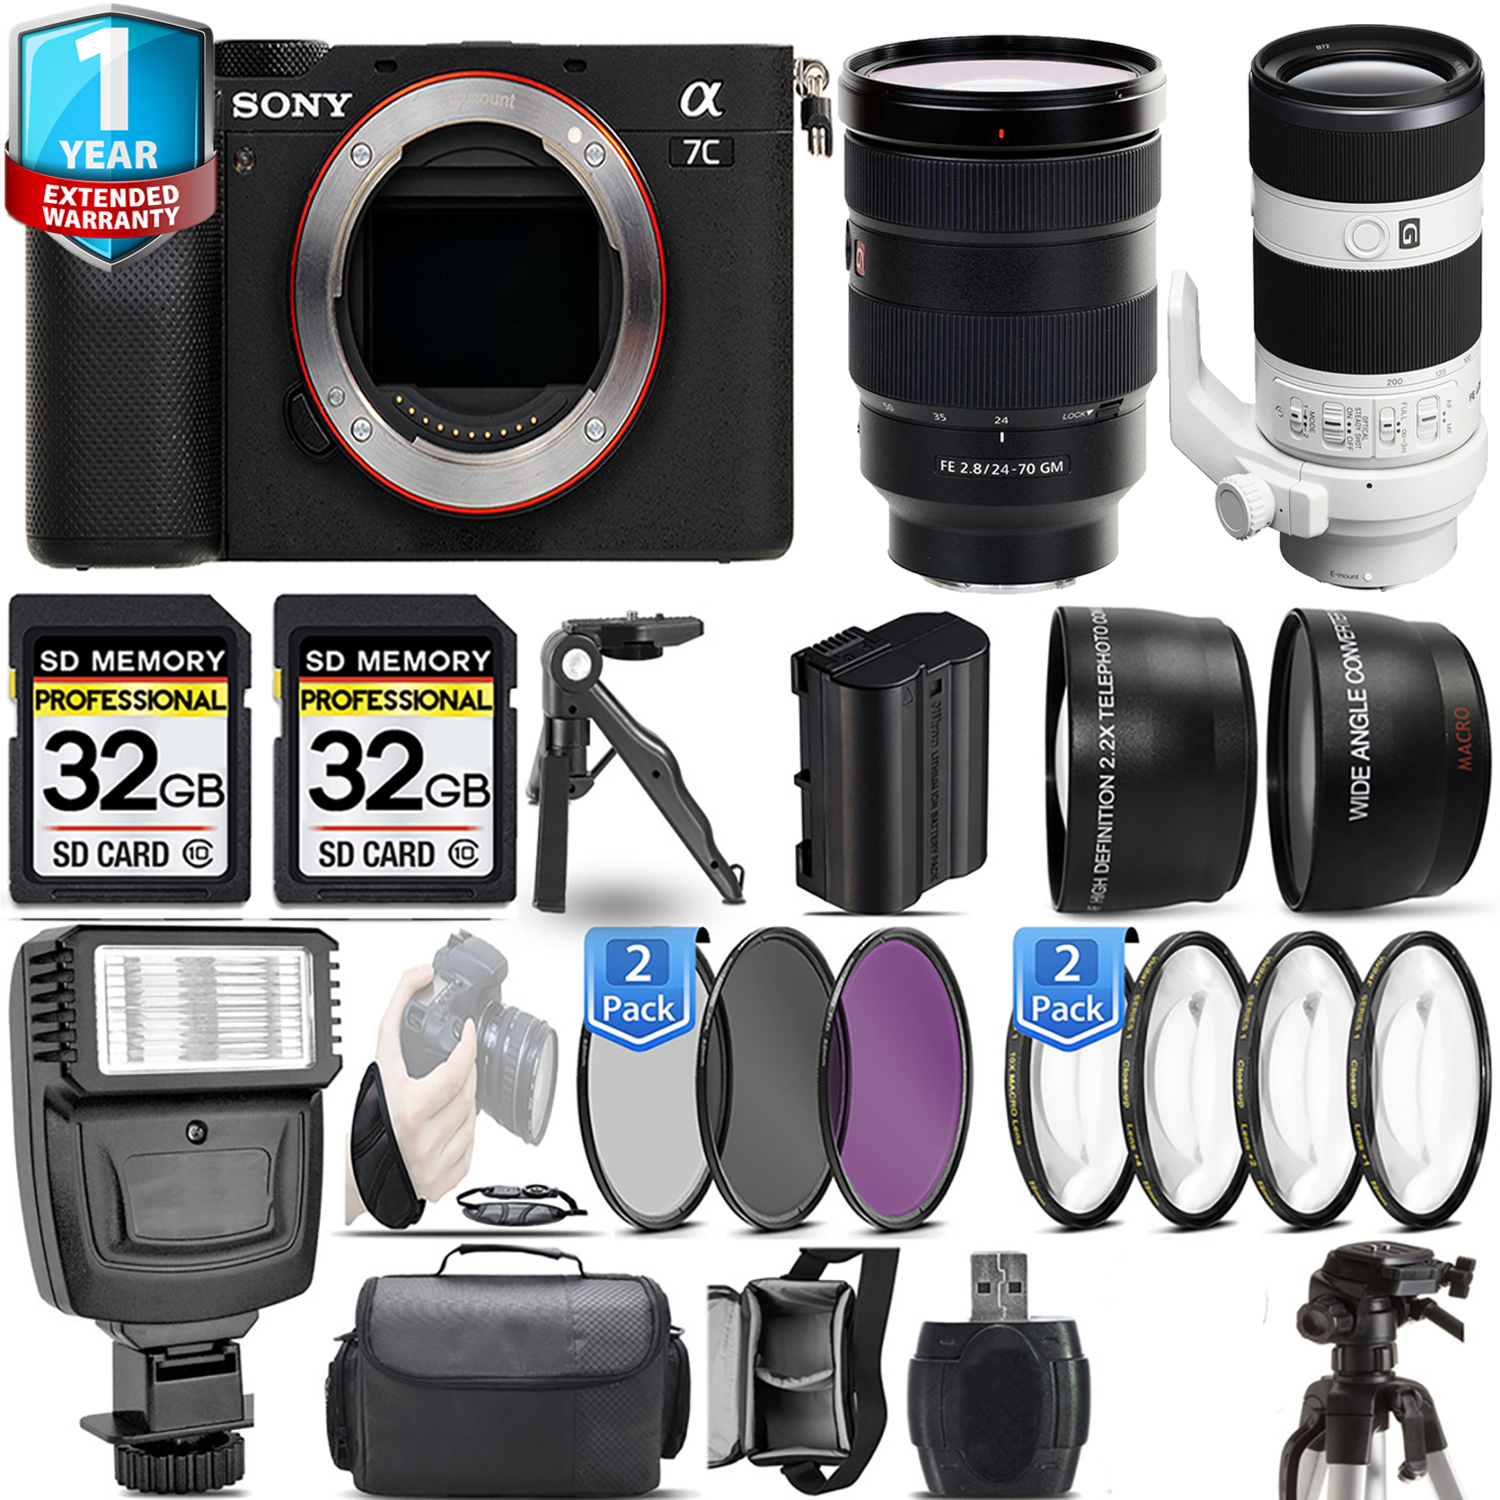 Alpha a7C Camera (Silver) + 70-200mm Lens + 24-70mm Lens + Flash + 1 Year Extended Warranty Kit *FREE SHIPPING*